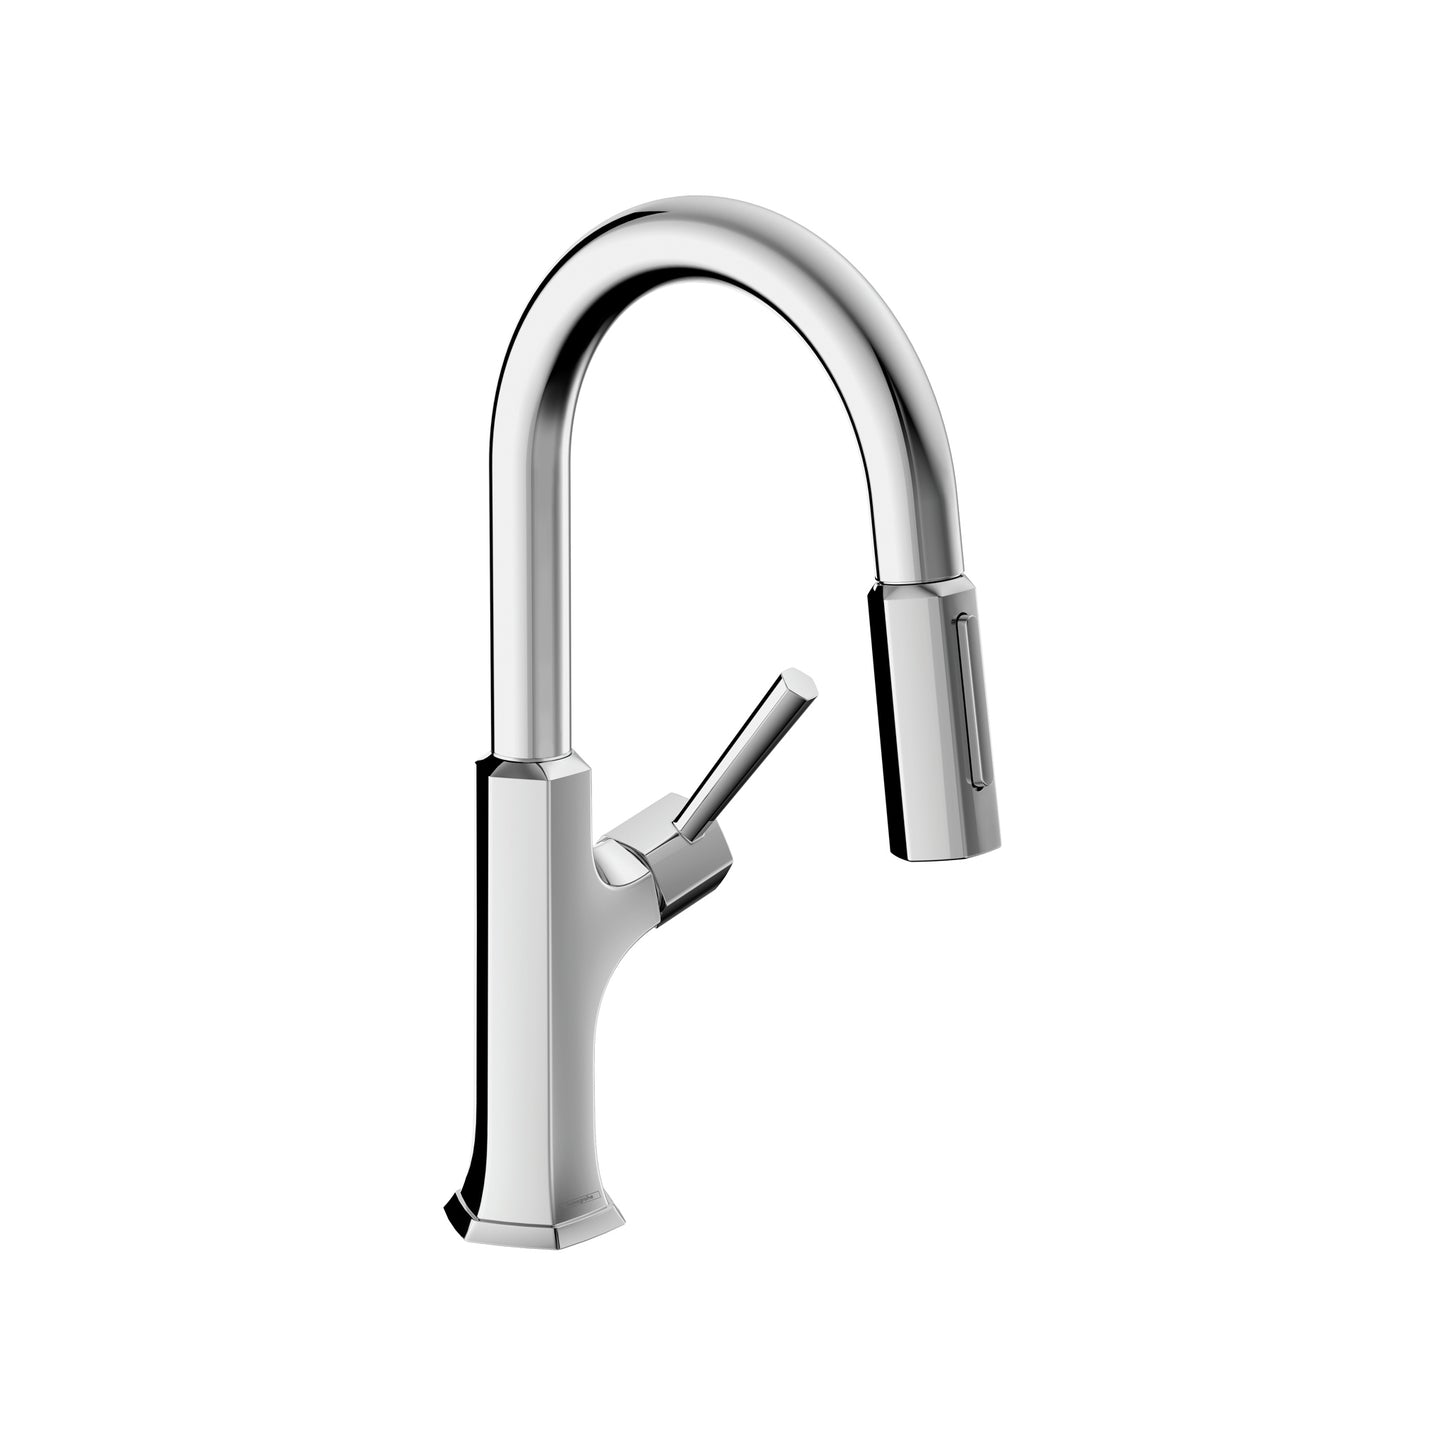 HANSGROHE 04853000 Chrome Locarno Transitional Kitchen Faucet 1.75 GPM